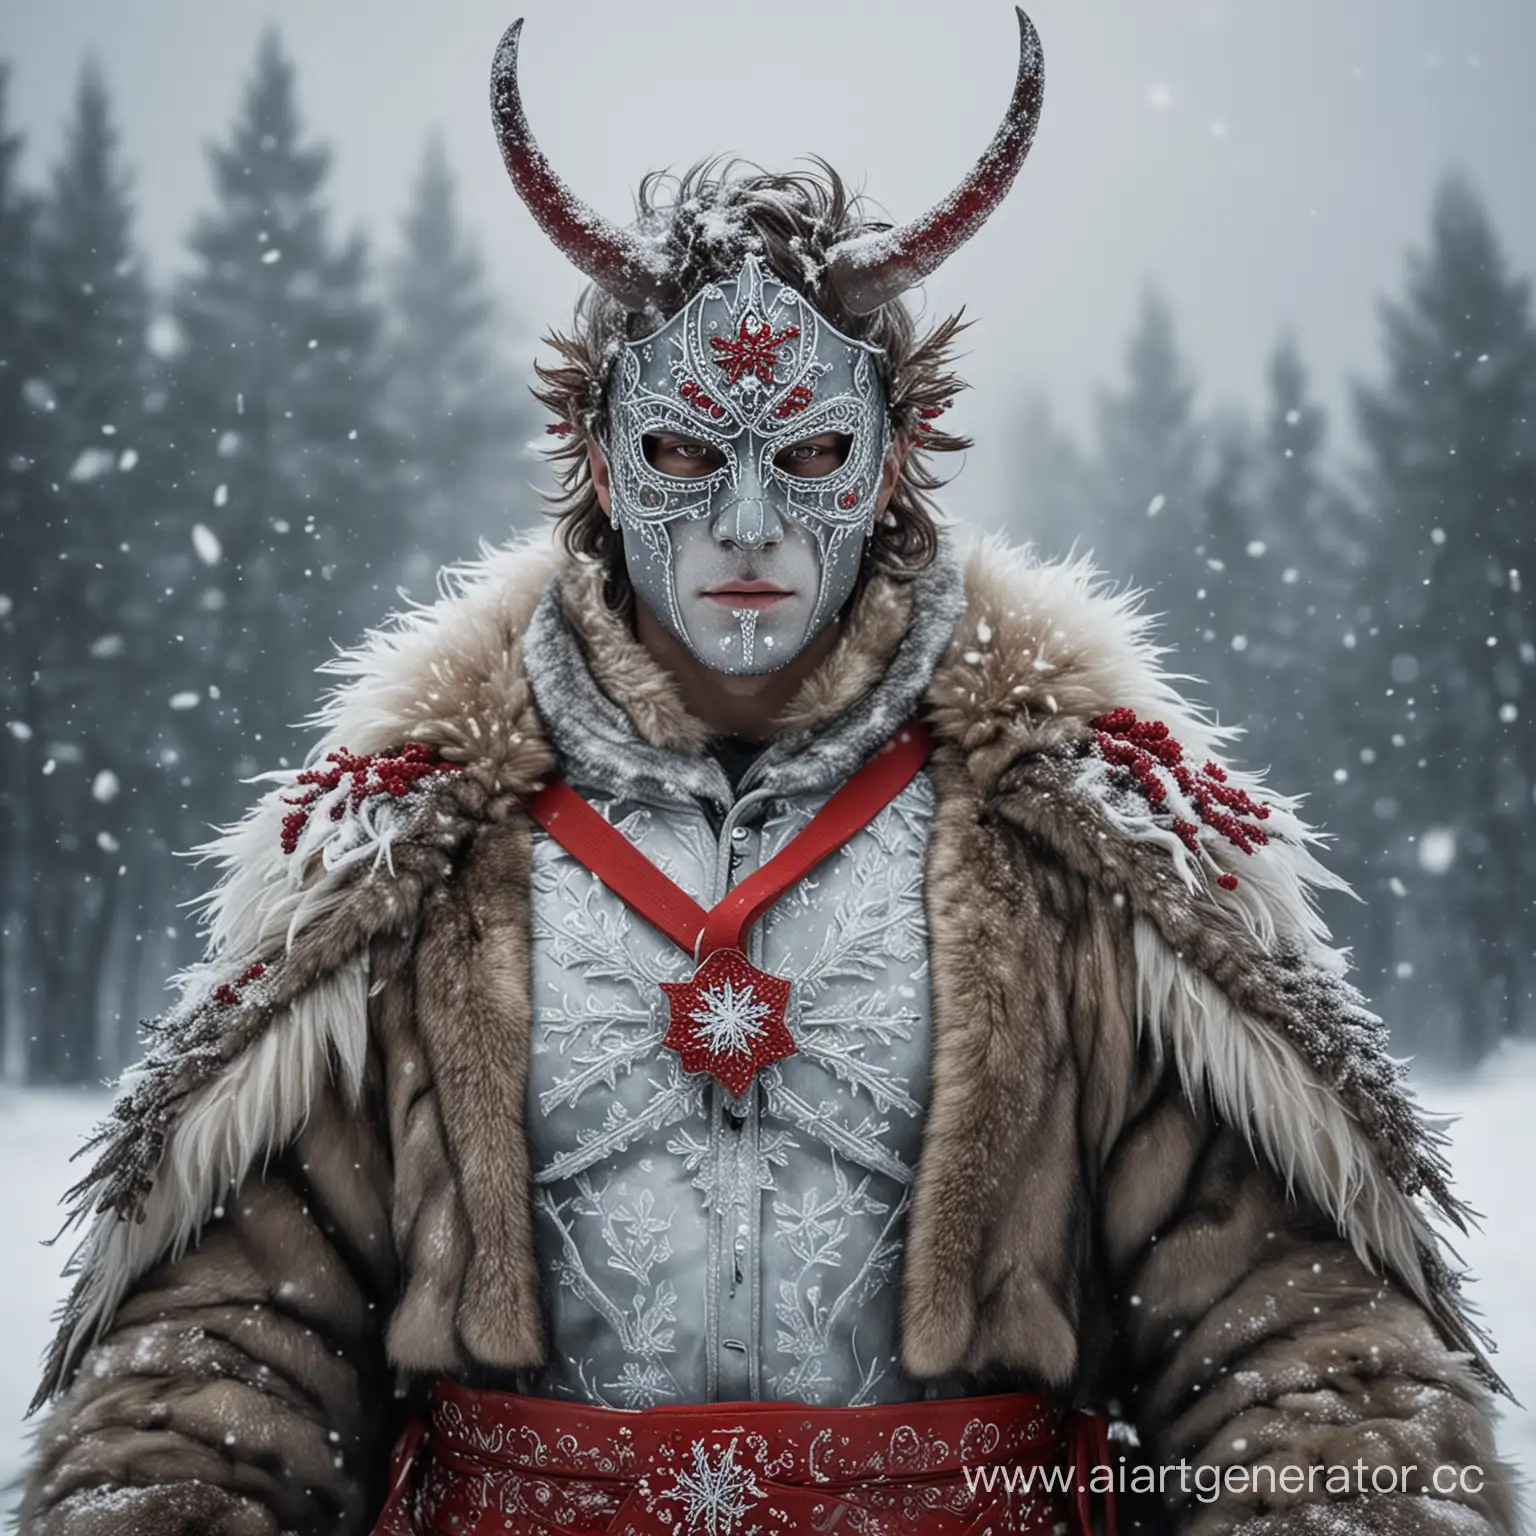 Frosty-Guardian-Icy-Warrior-with-Snowflake-Adorned-Fur-Coat